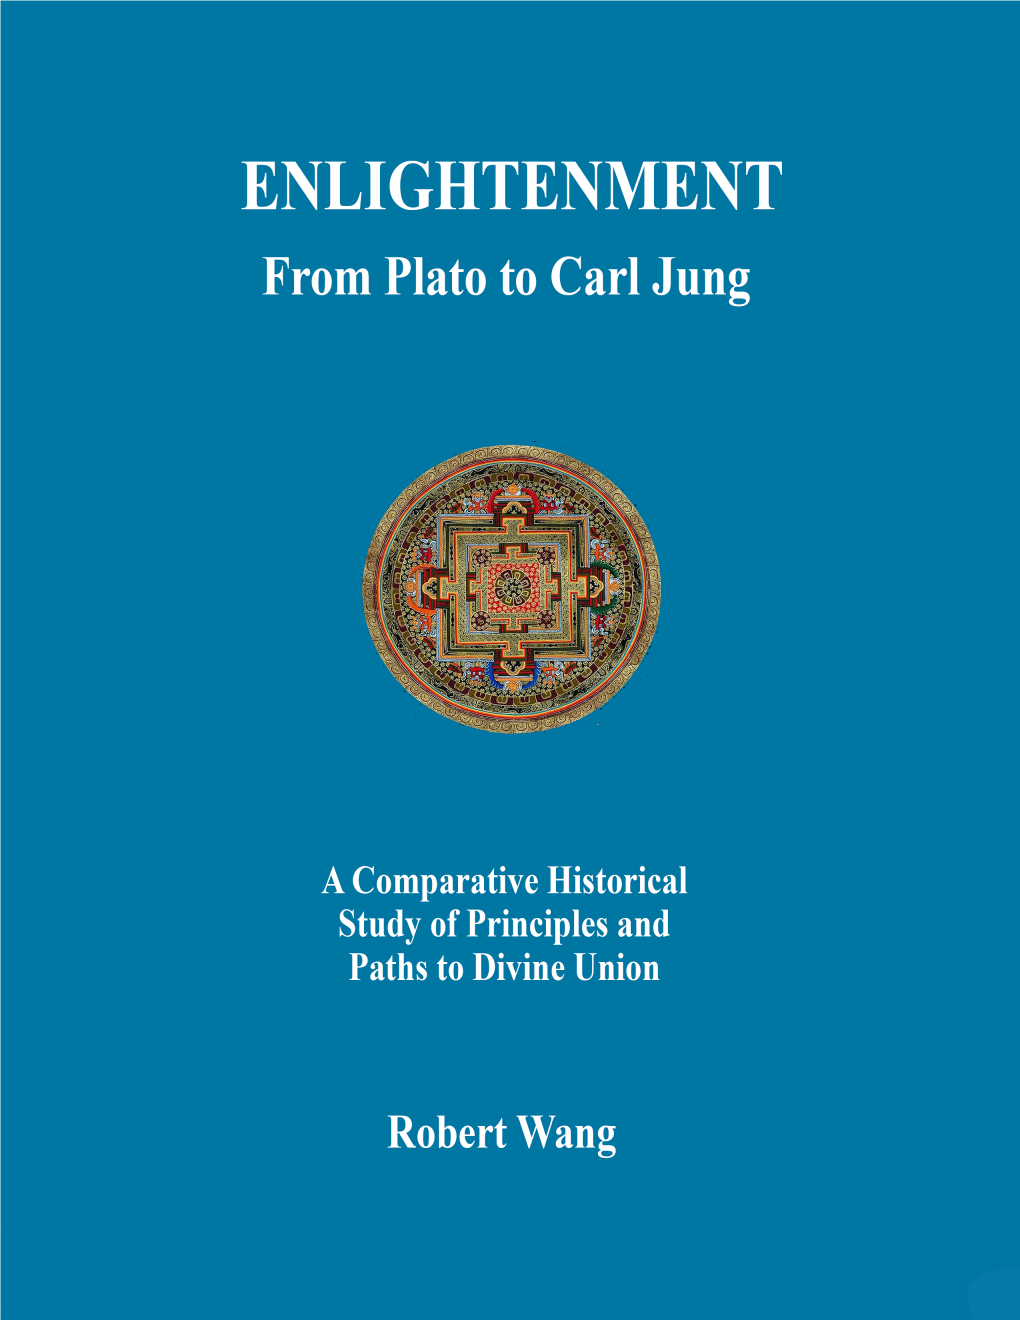 Enlightenment-Plato to Carl Jung